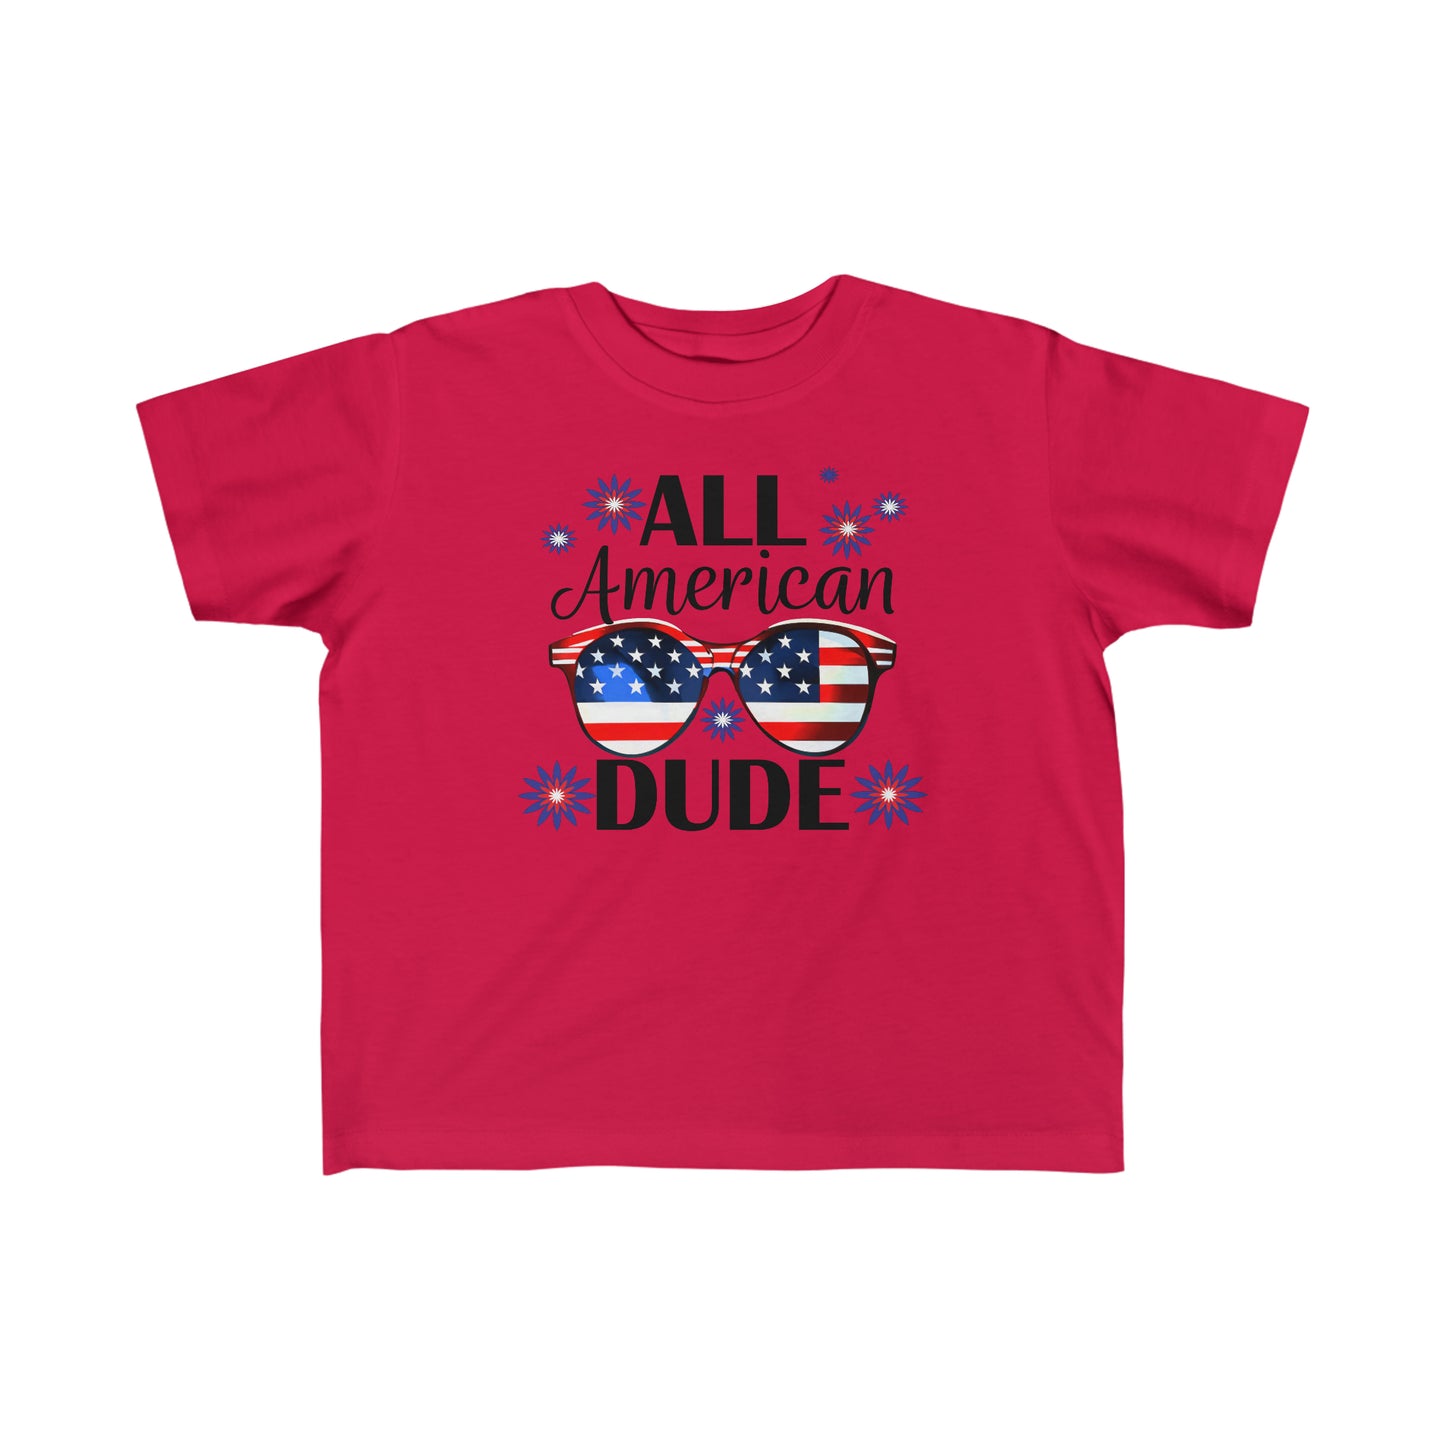 "All American Dude" Fine Jersey Toddler Tee